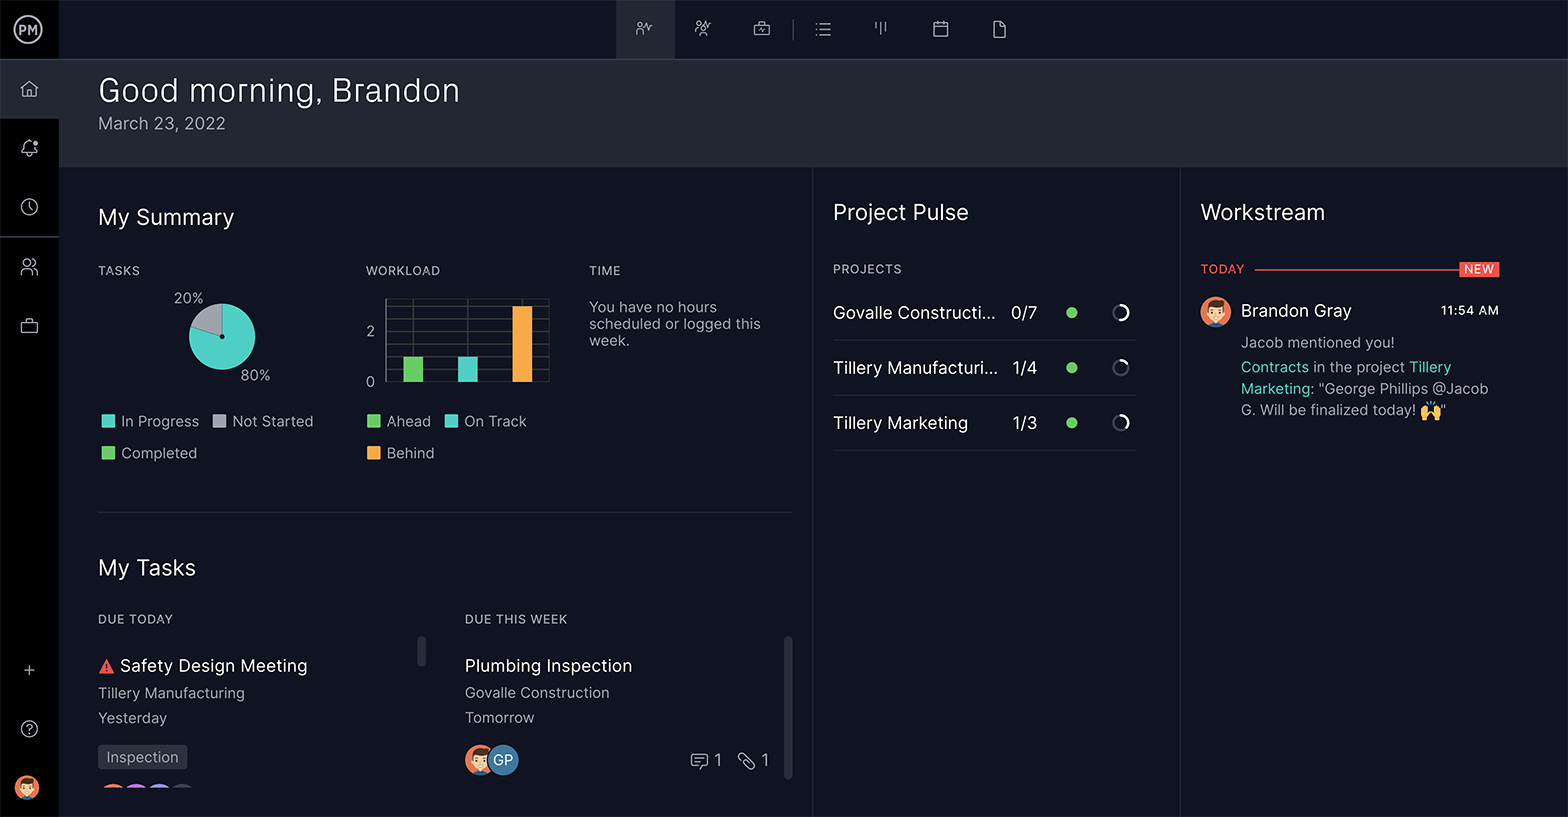 ProjectManager's product management software showing a real-time dashboard